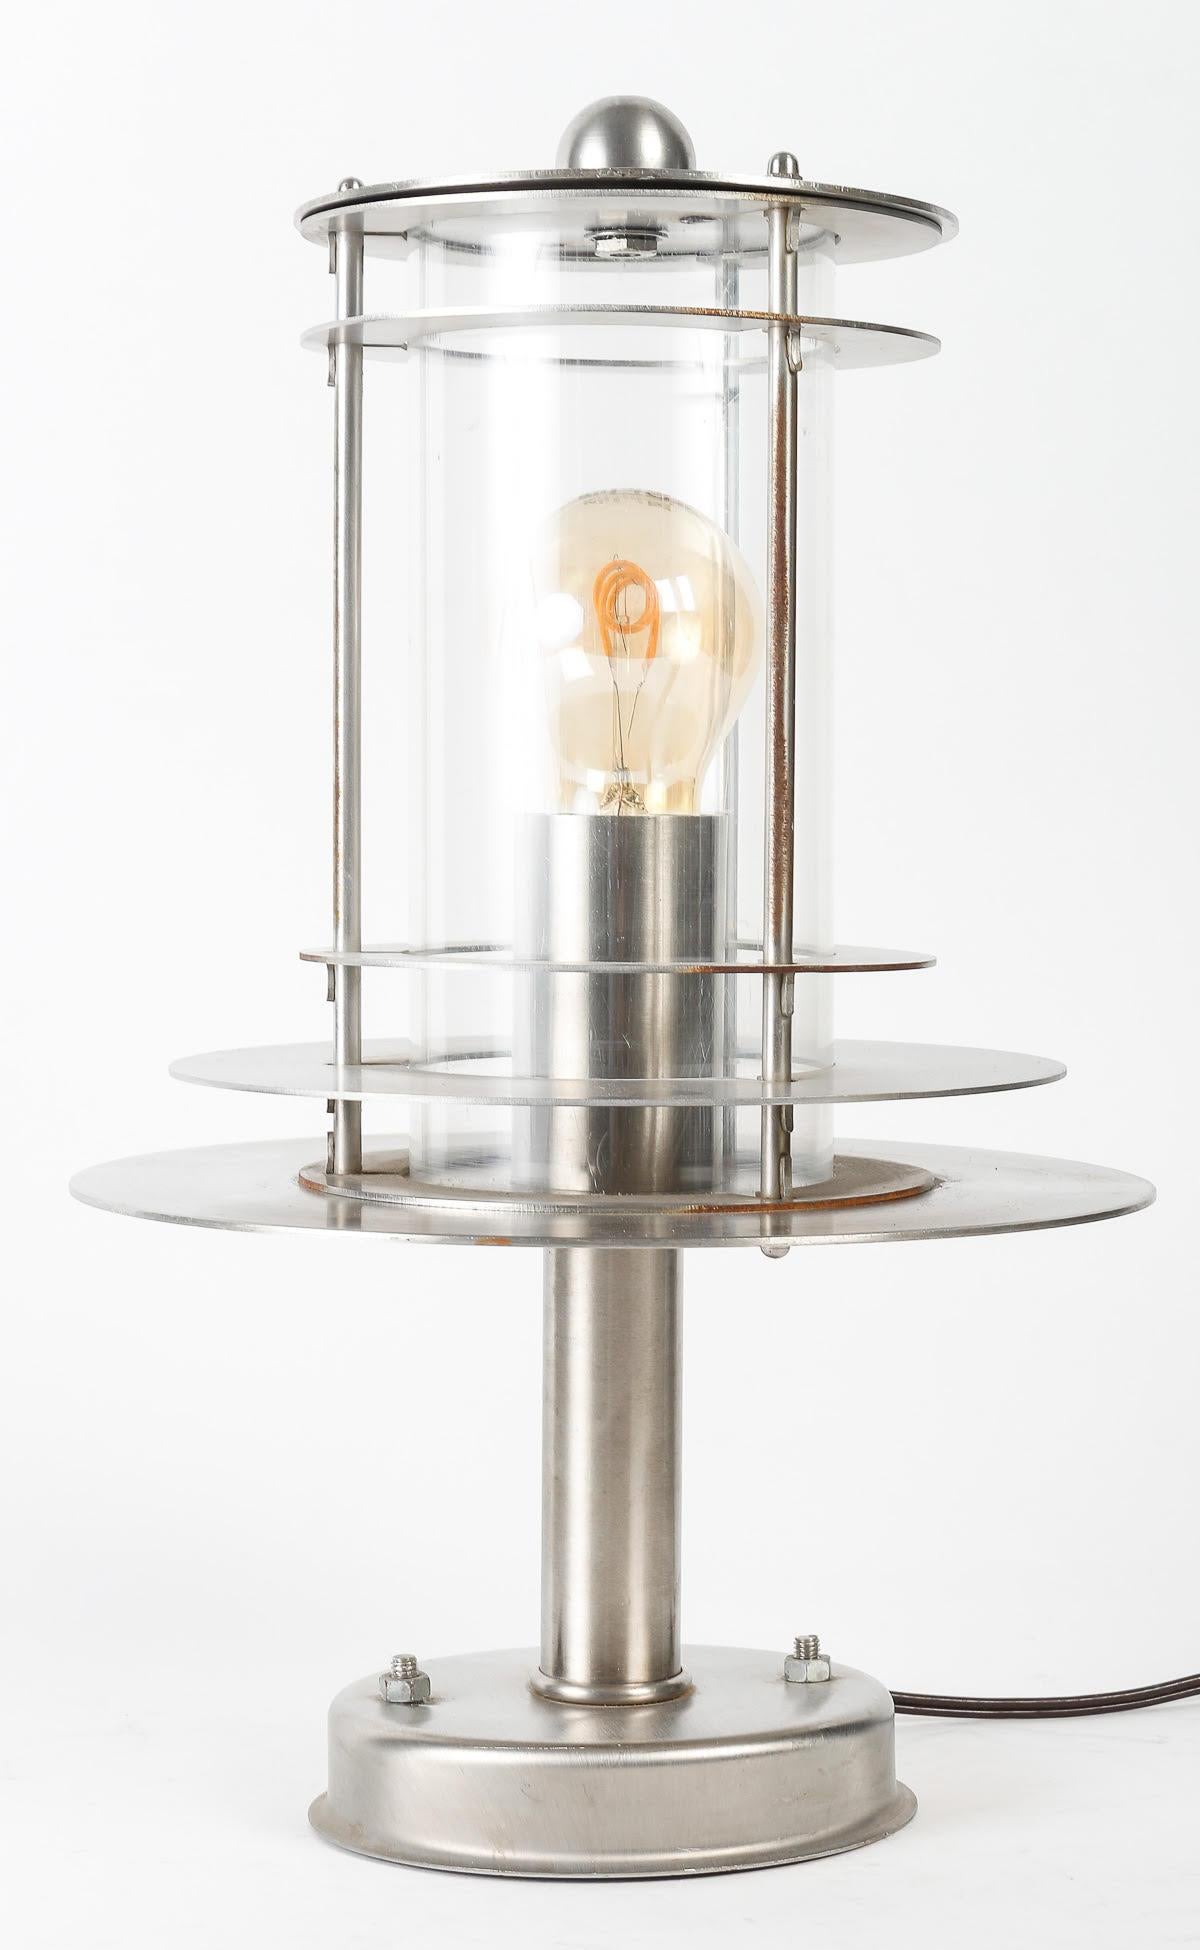 Table lamp in steel, 20th century work.

Design lamp from the 20th century in steel.
h: 39cm, d: 25cm